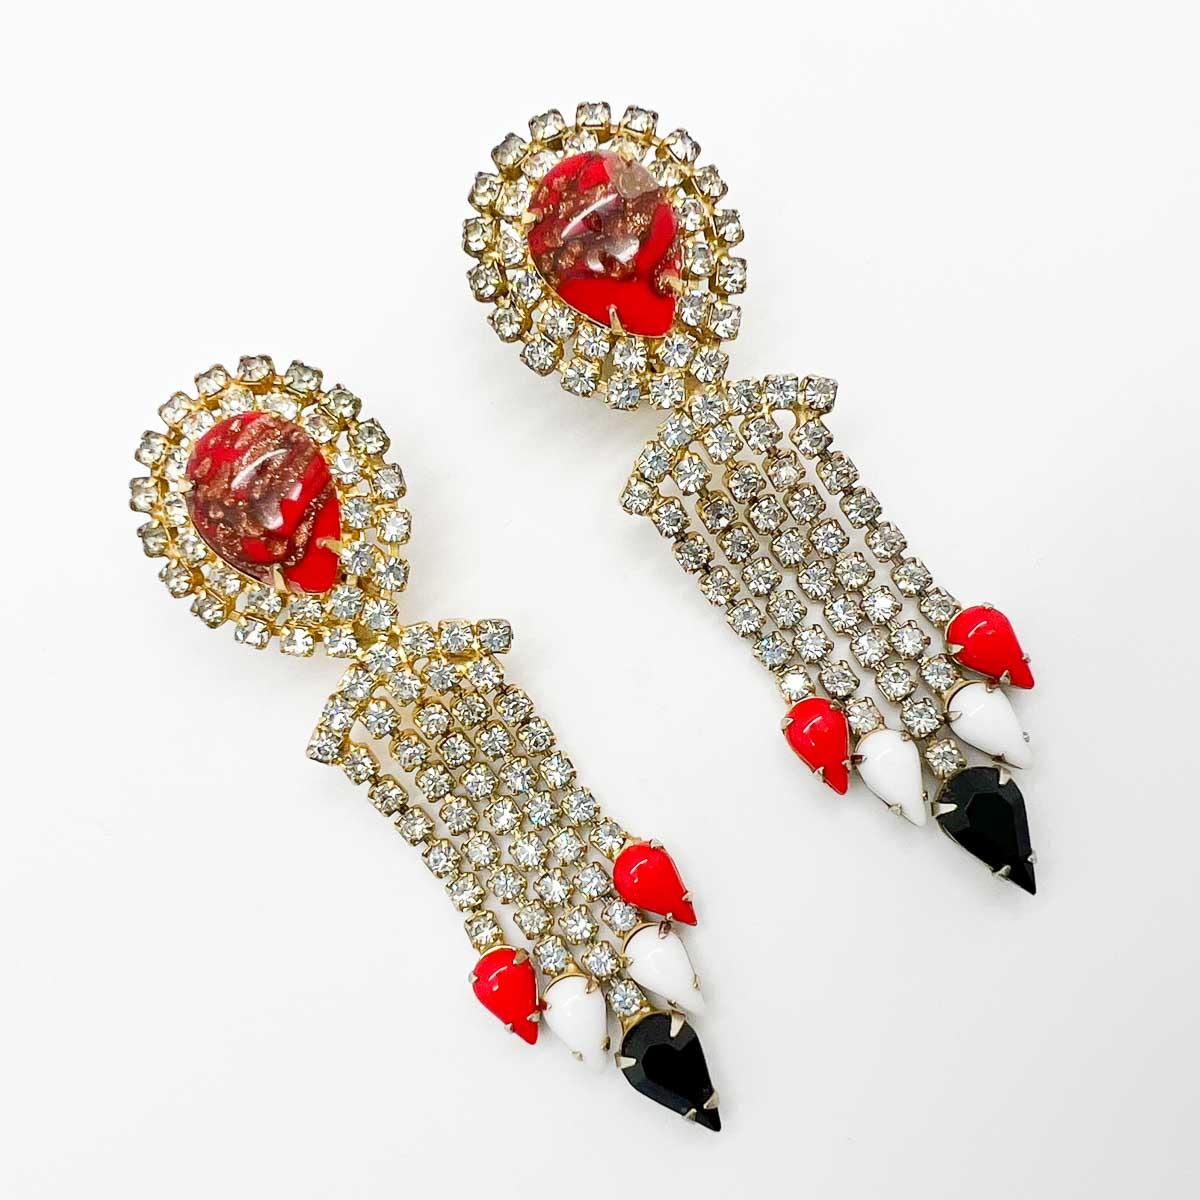 A fabulous pair of 1960s vintage Hobe Chandelier Earrings. The perfect bright and impactful chandelier earring. The attention to detail making these beauties a true work of wearable art.
Hobé jewellery has a timeless and legendary splendour with an